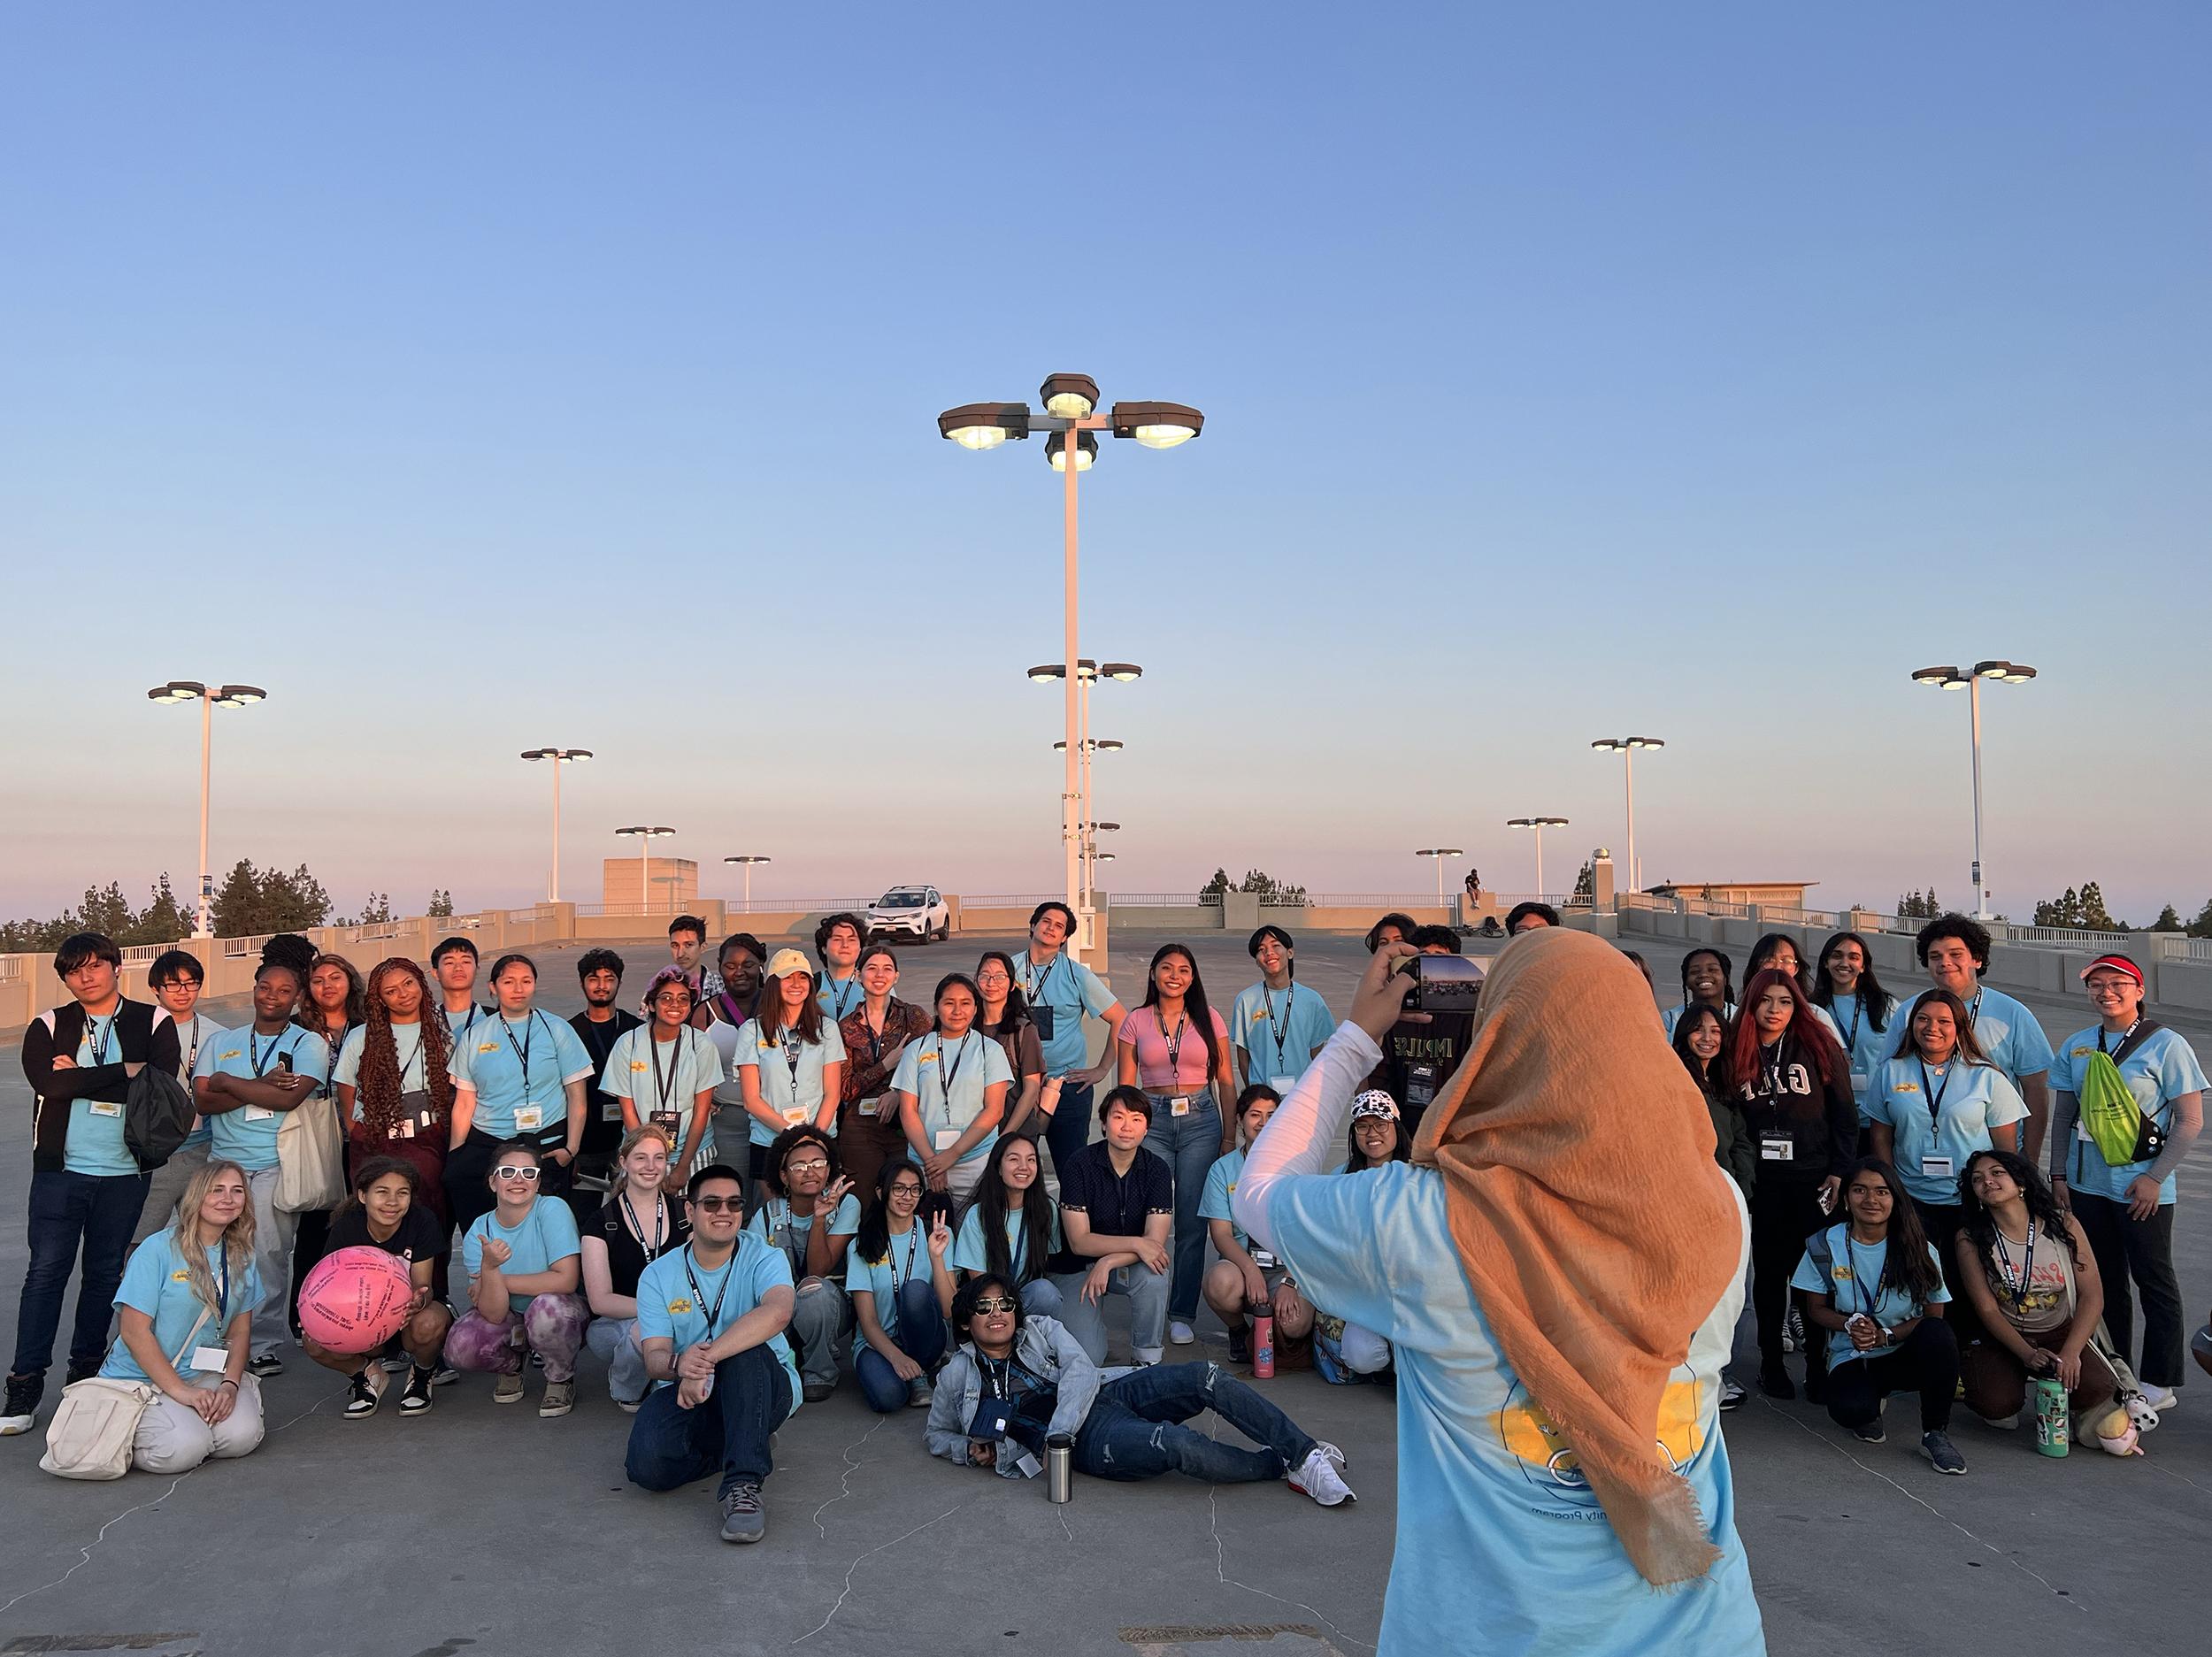 A woman wearing a hijab takes a group photo of students around sunset on campus